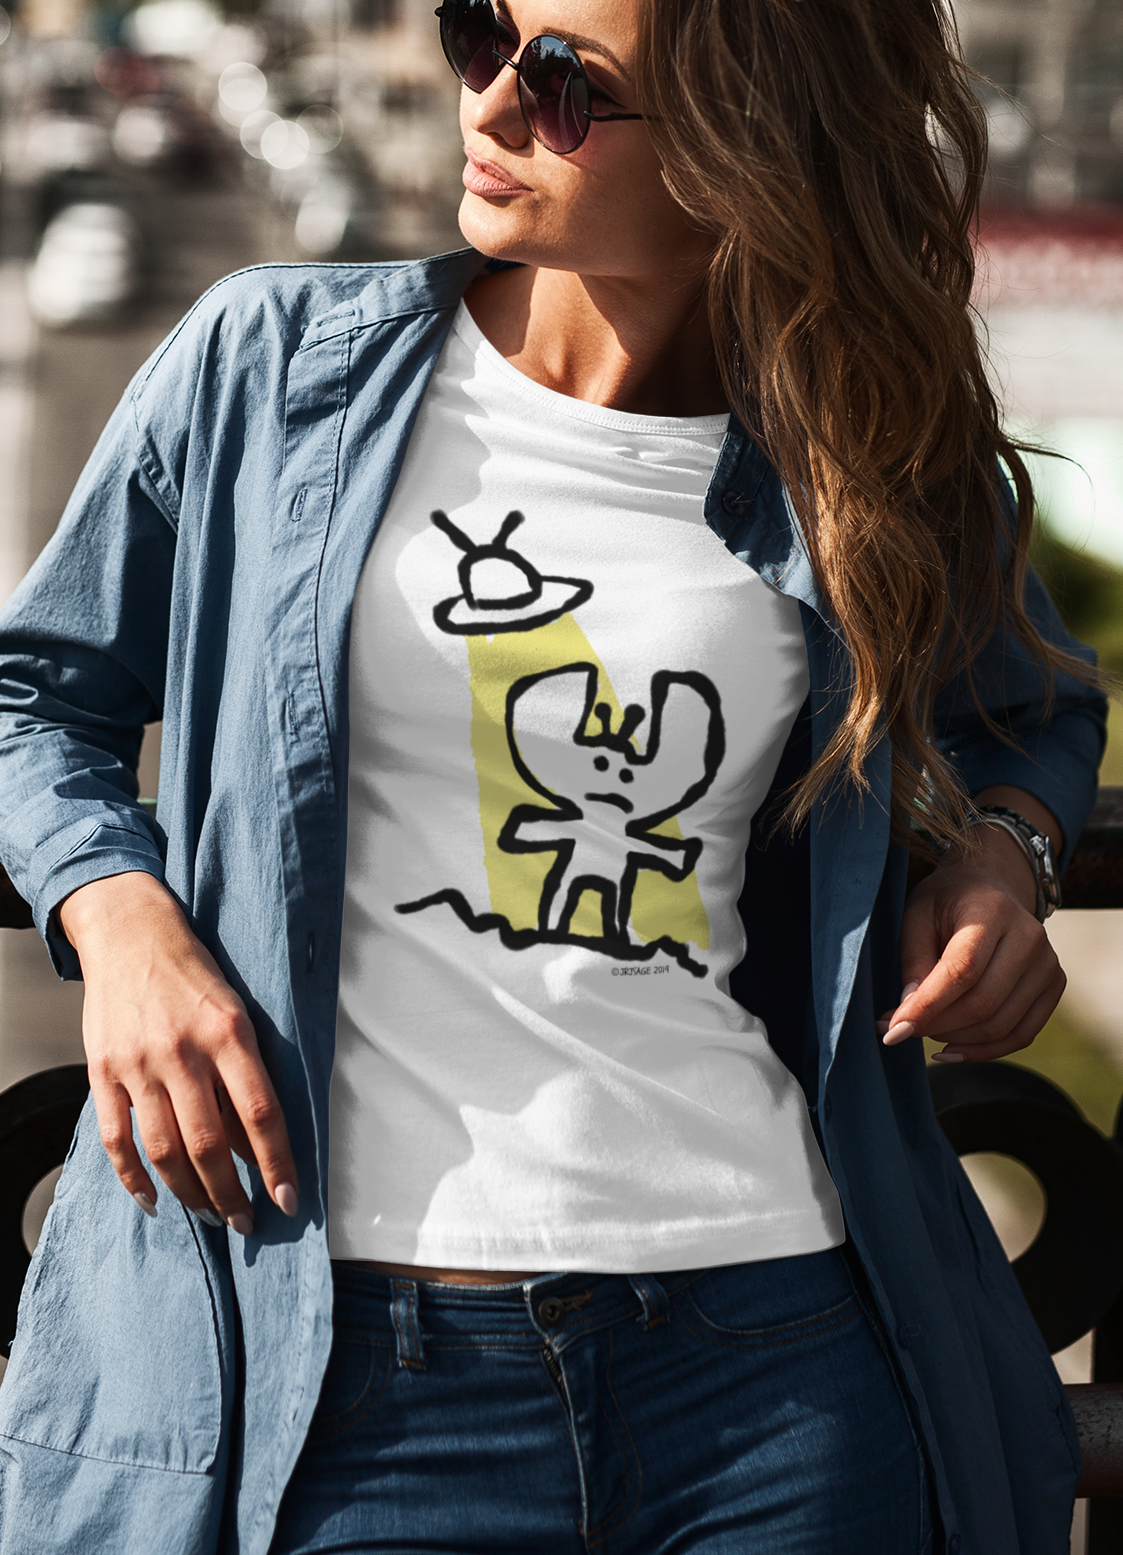 Alien T-shirt - Young woman casually wearing a cute Alien t-shirt illustrated on a classic white vegan quality t-shirt by Hector and Bone